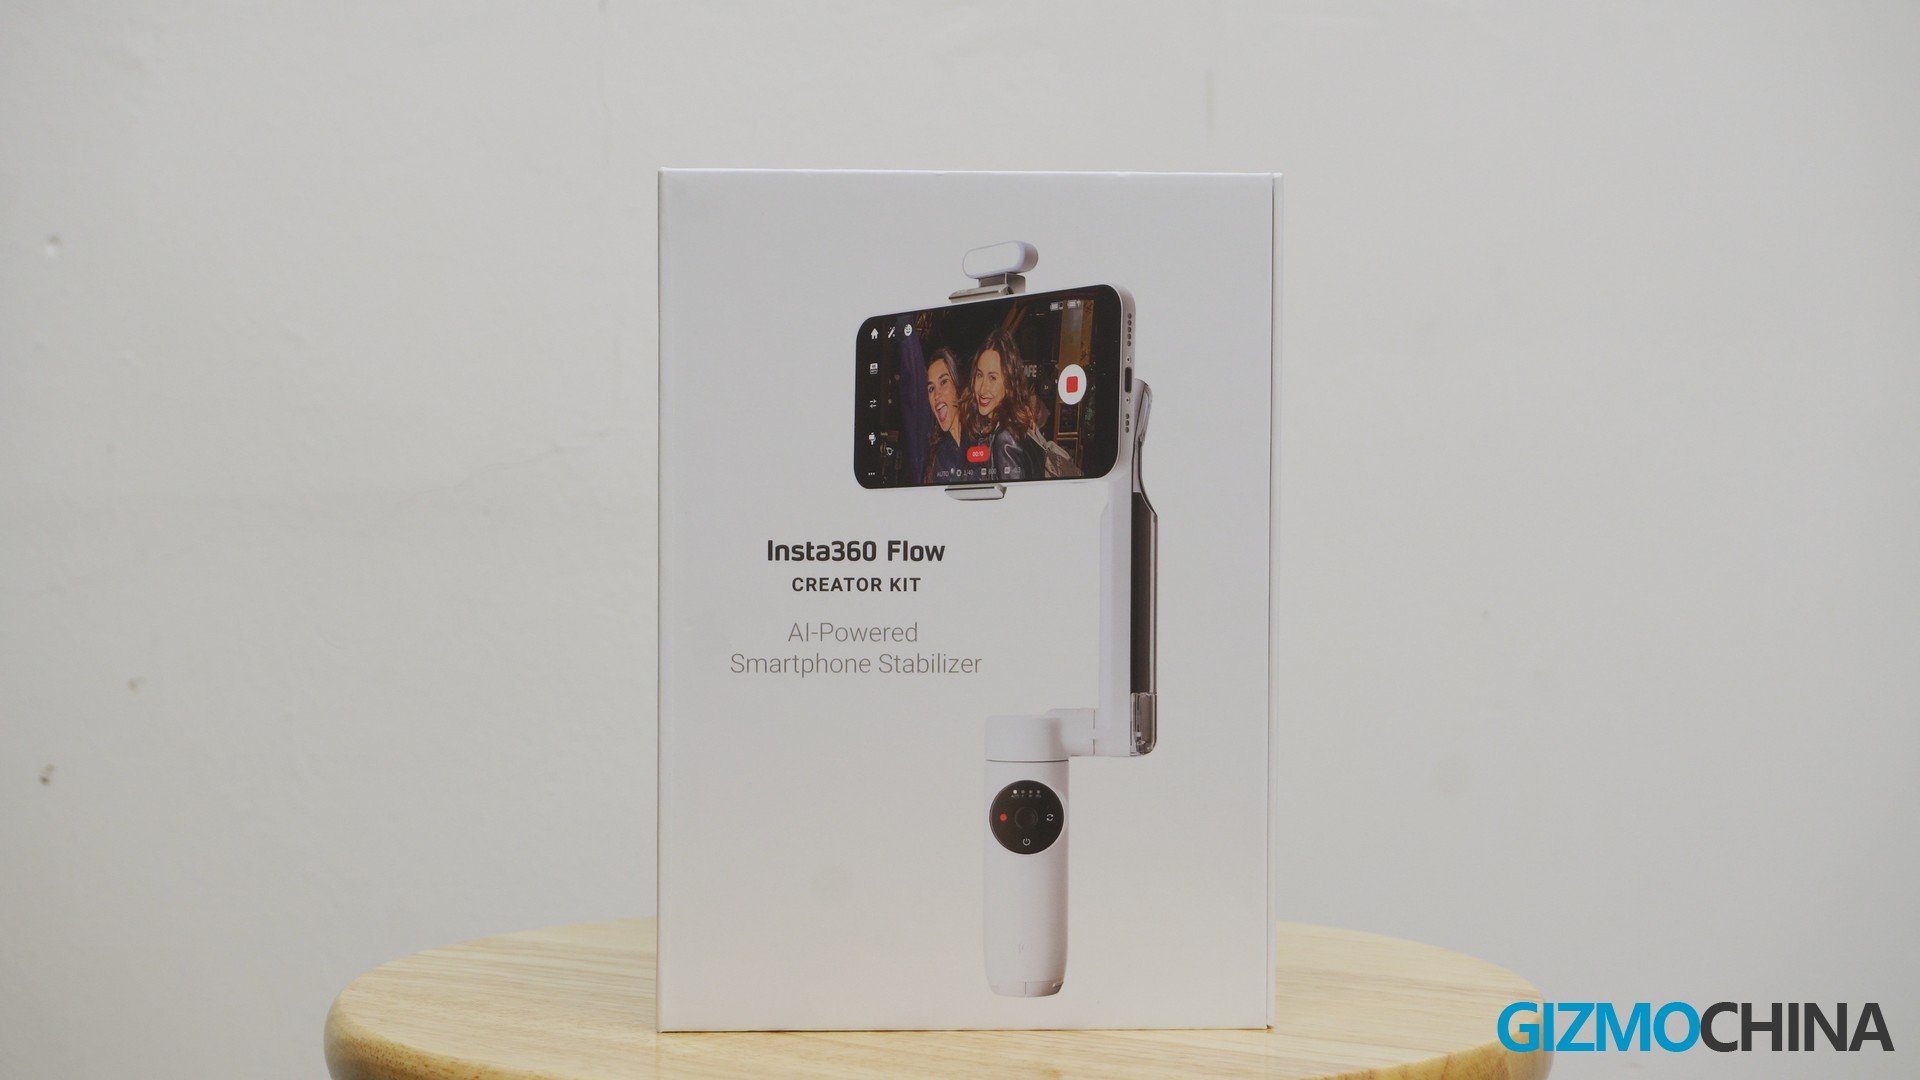 Introducing Insta360 Flow - The AI Tracking Smartphone Stabilizer